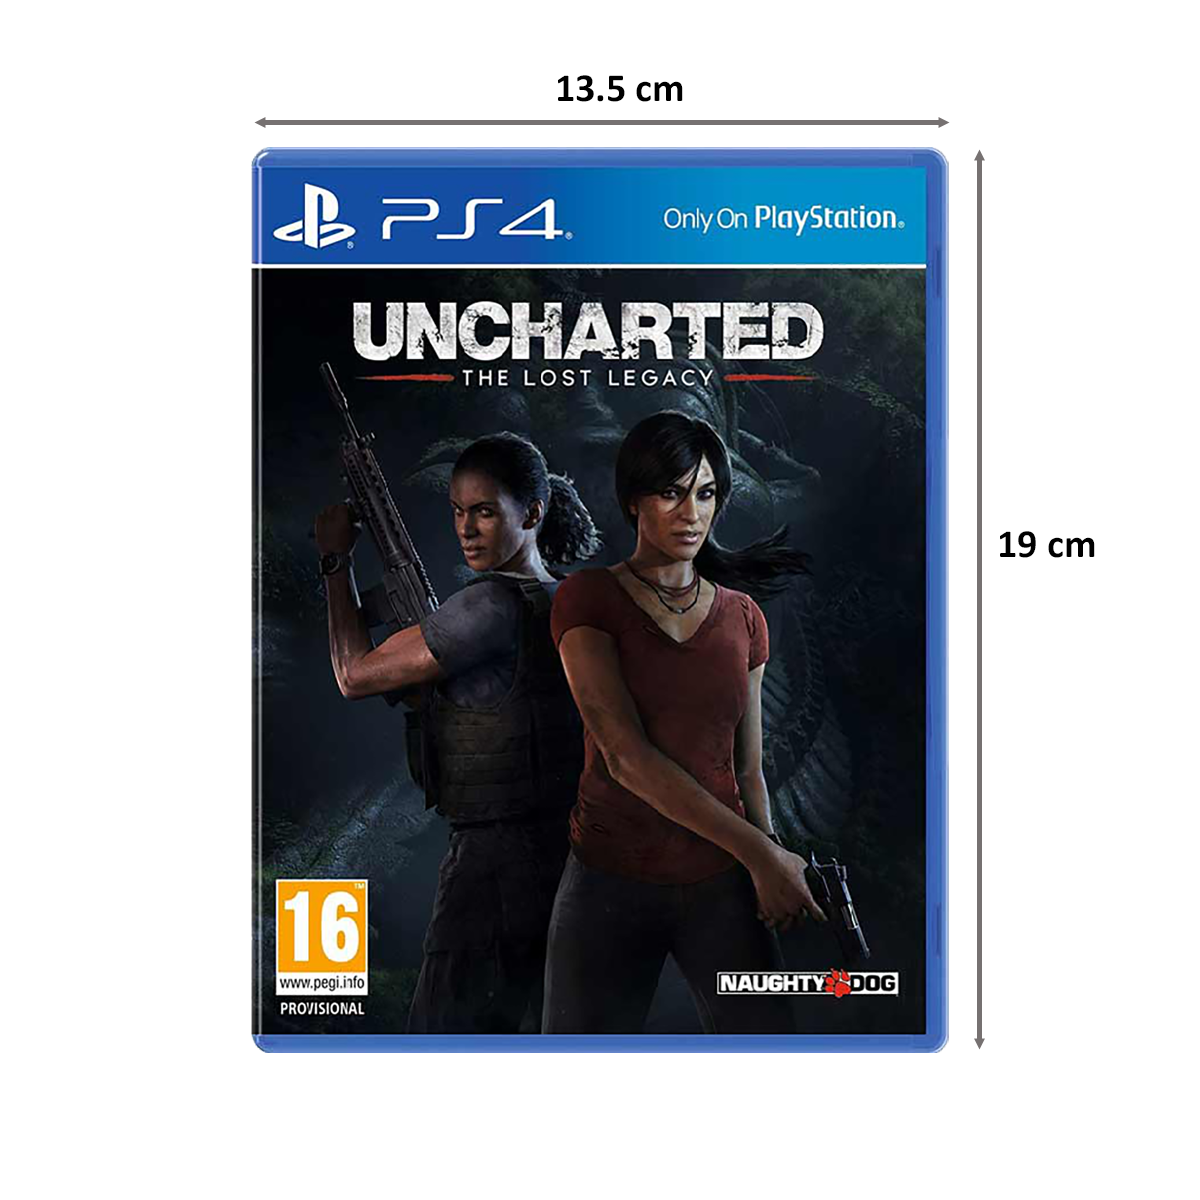 Buy Game (Uncharted: The Lost Legacy) Online Croma